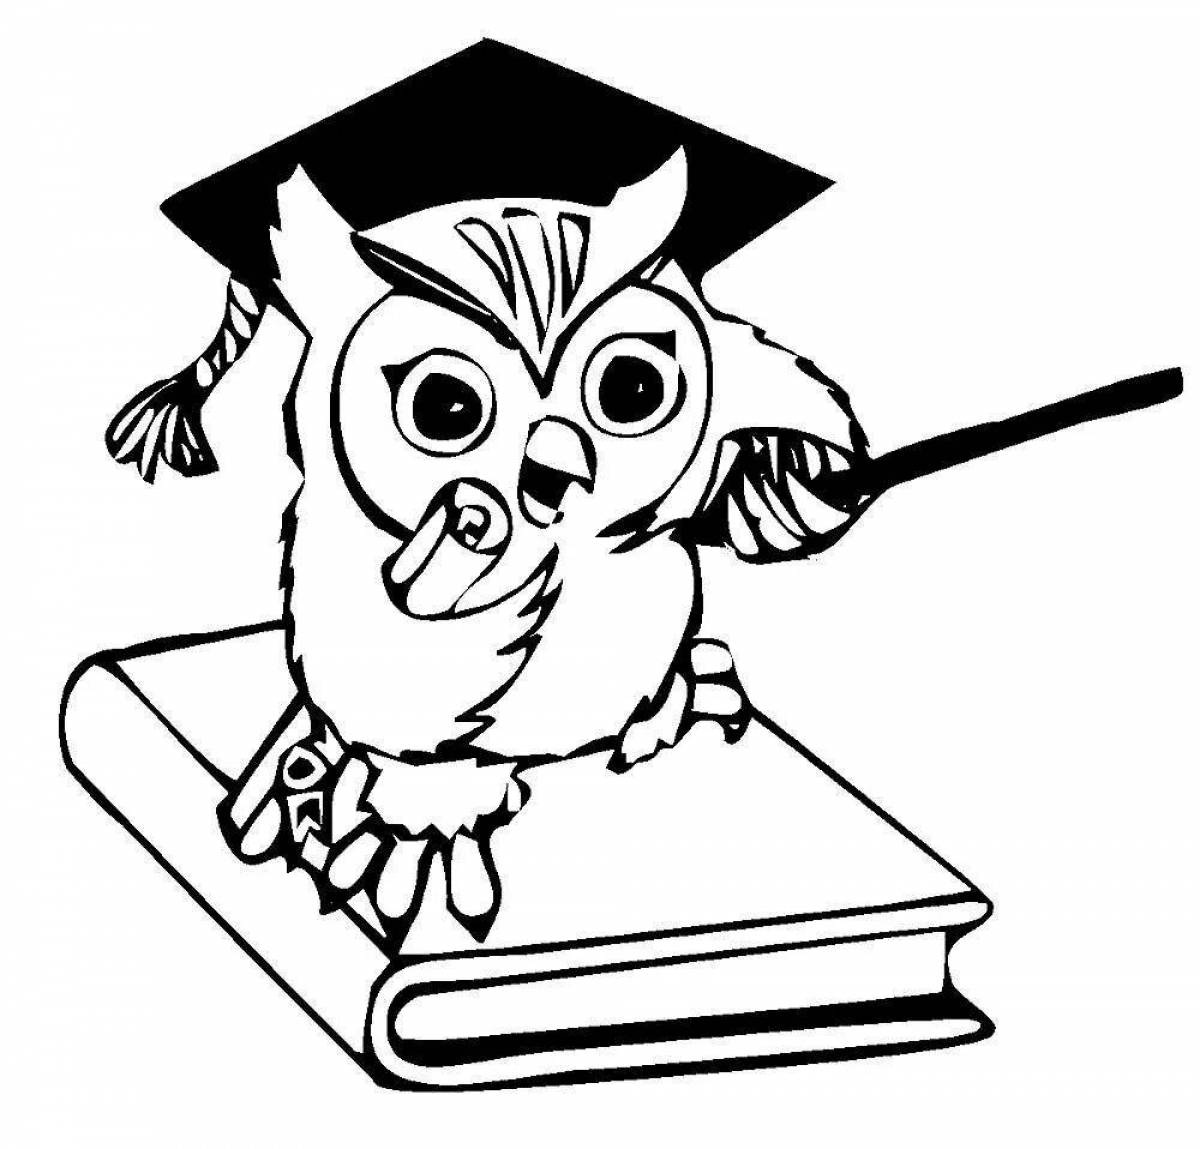 Coloring book wise owl with wise posture